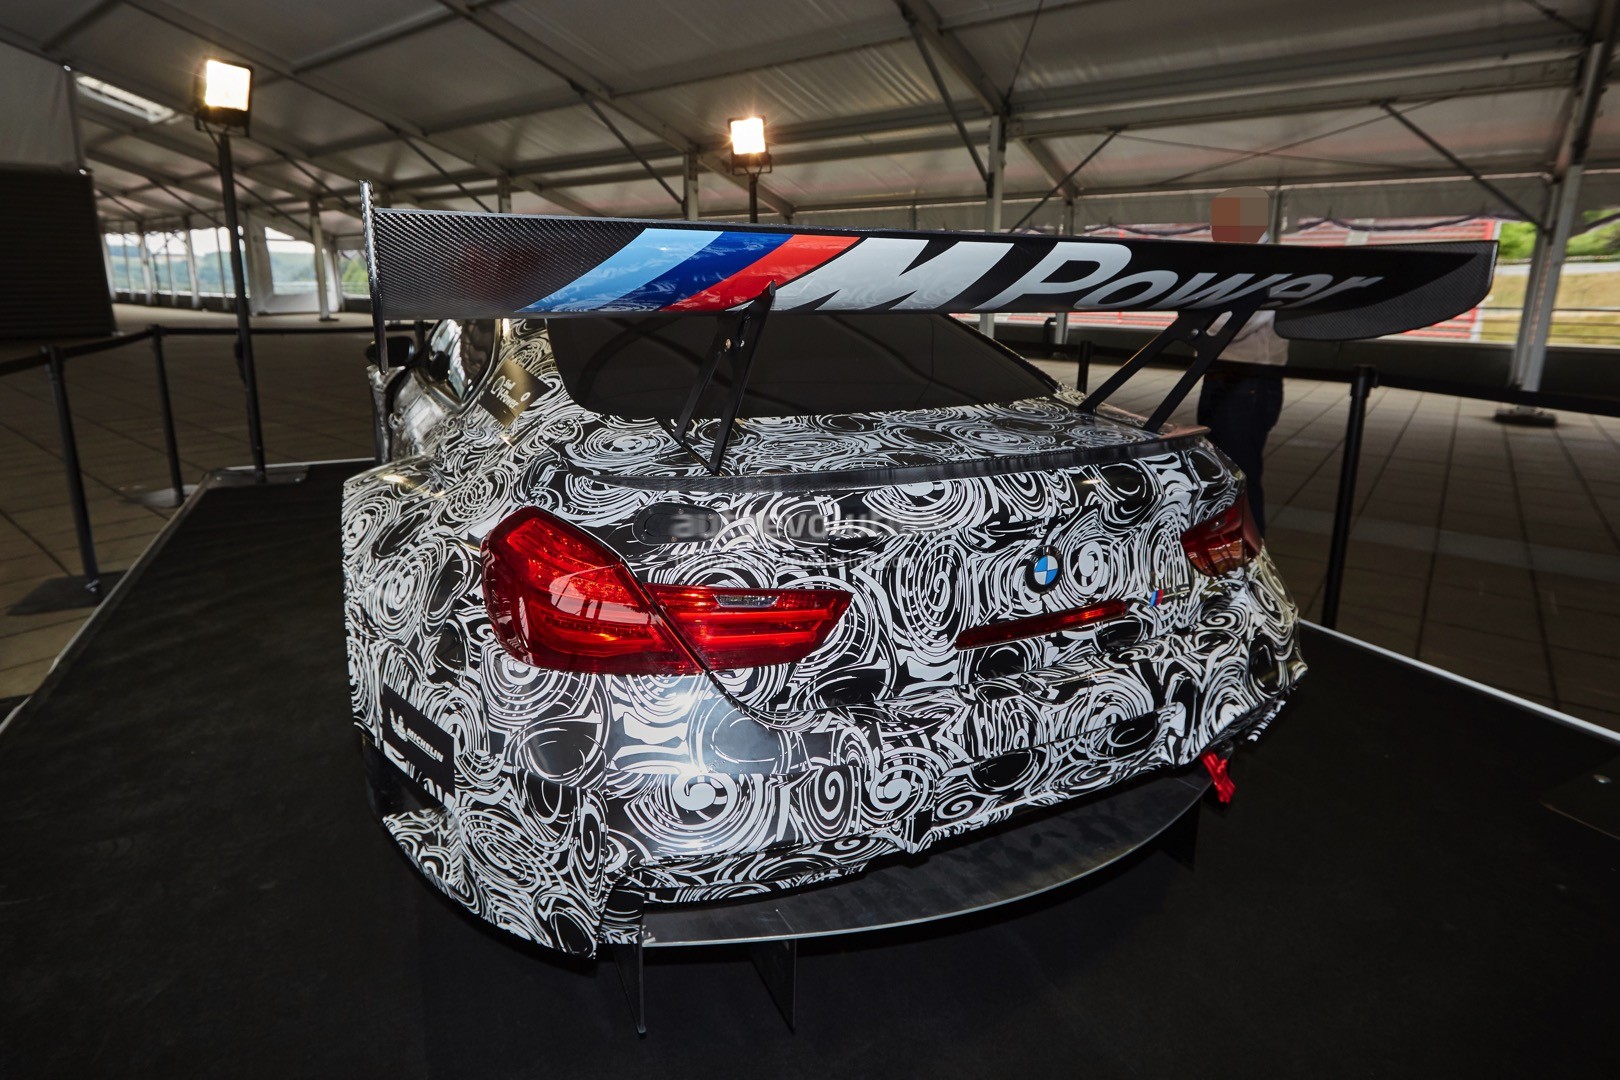 2016-bmw-m6-gt3-caught-on-camera-at-the-spa-francorchamps-24-hour-race-photo-gallery_12